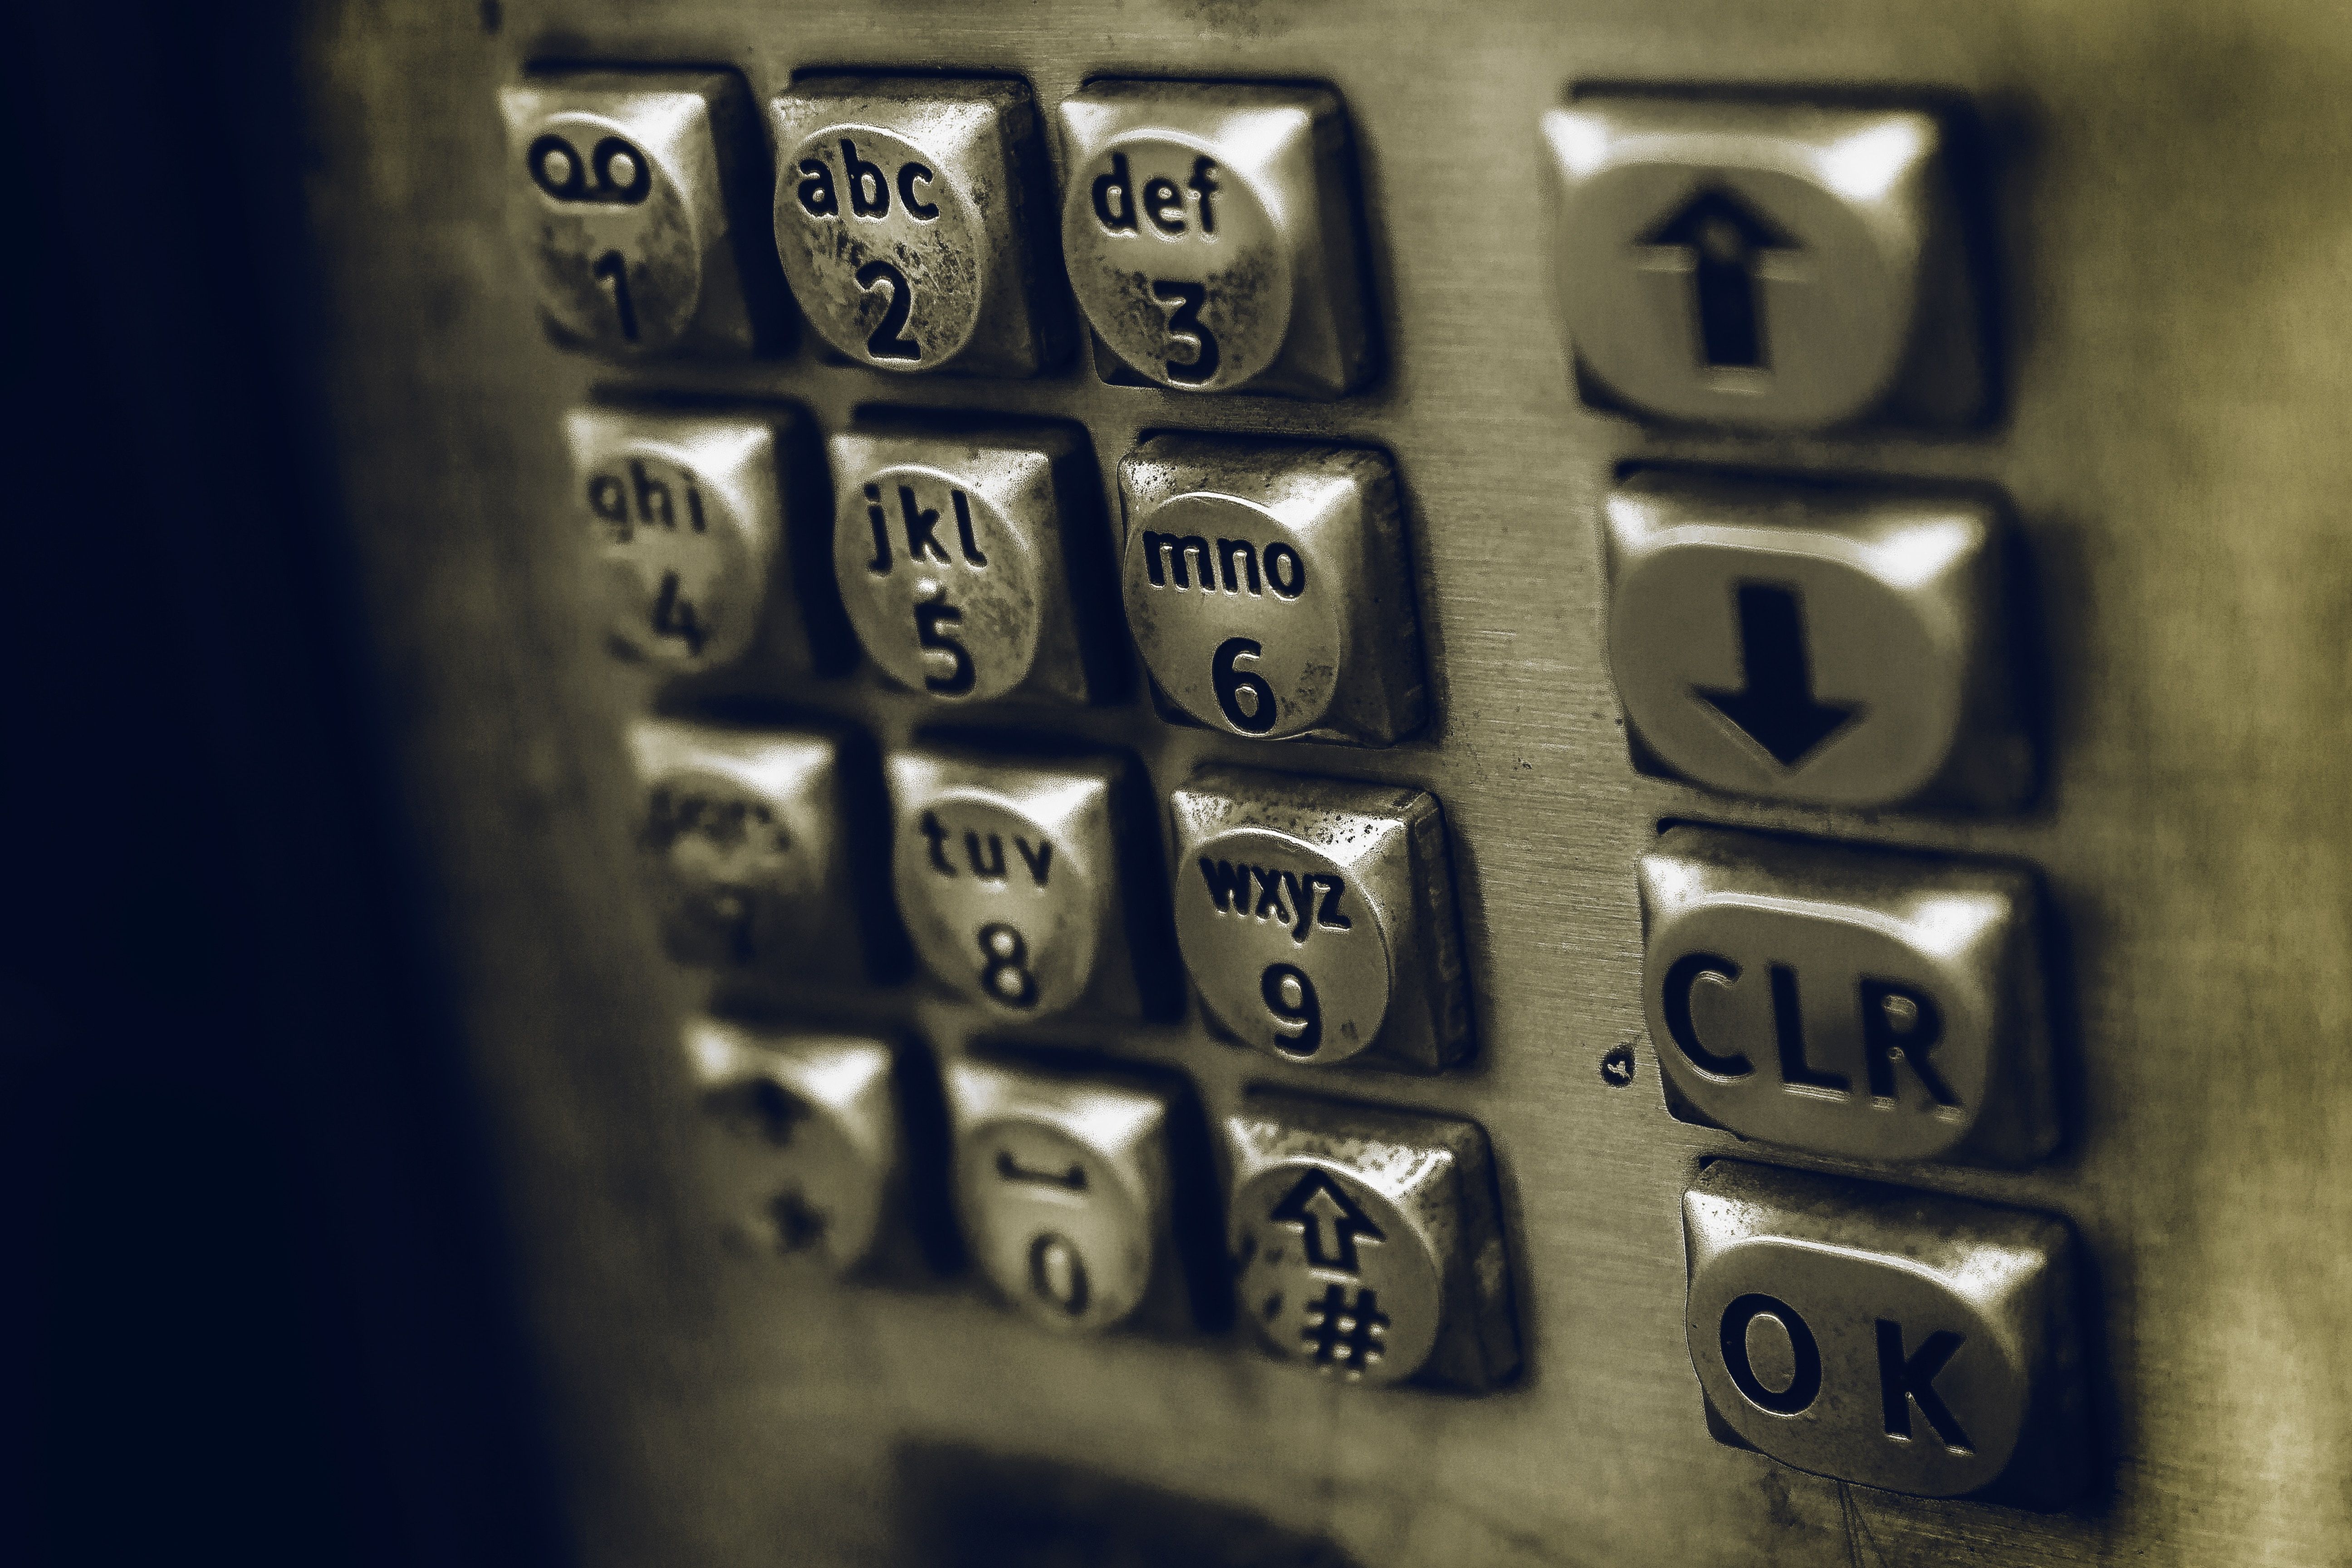 A close up of an old pay phone's keypad representing graphic conversation